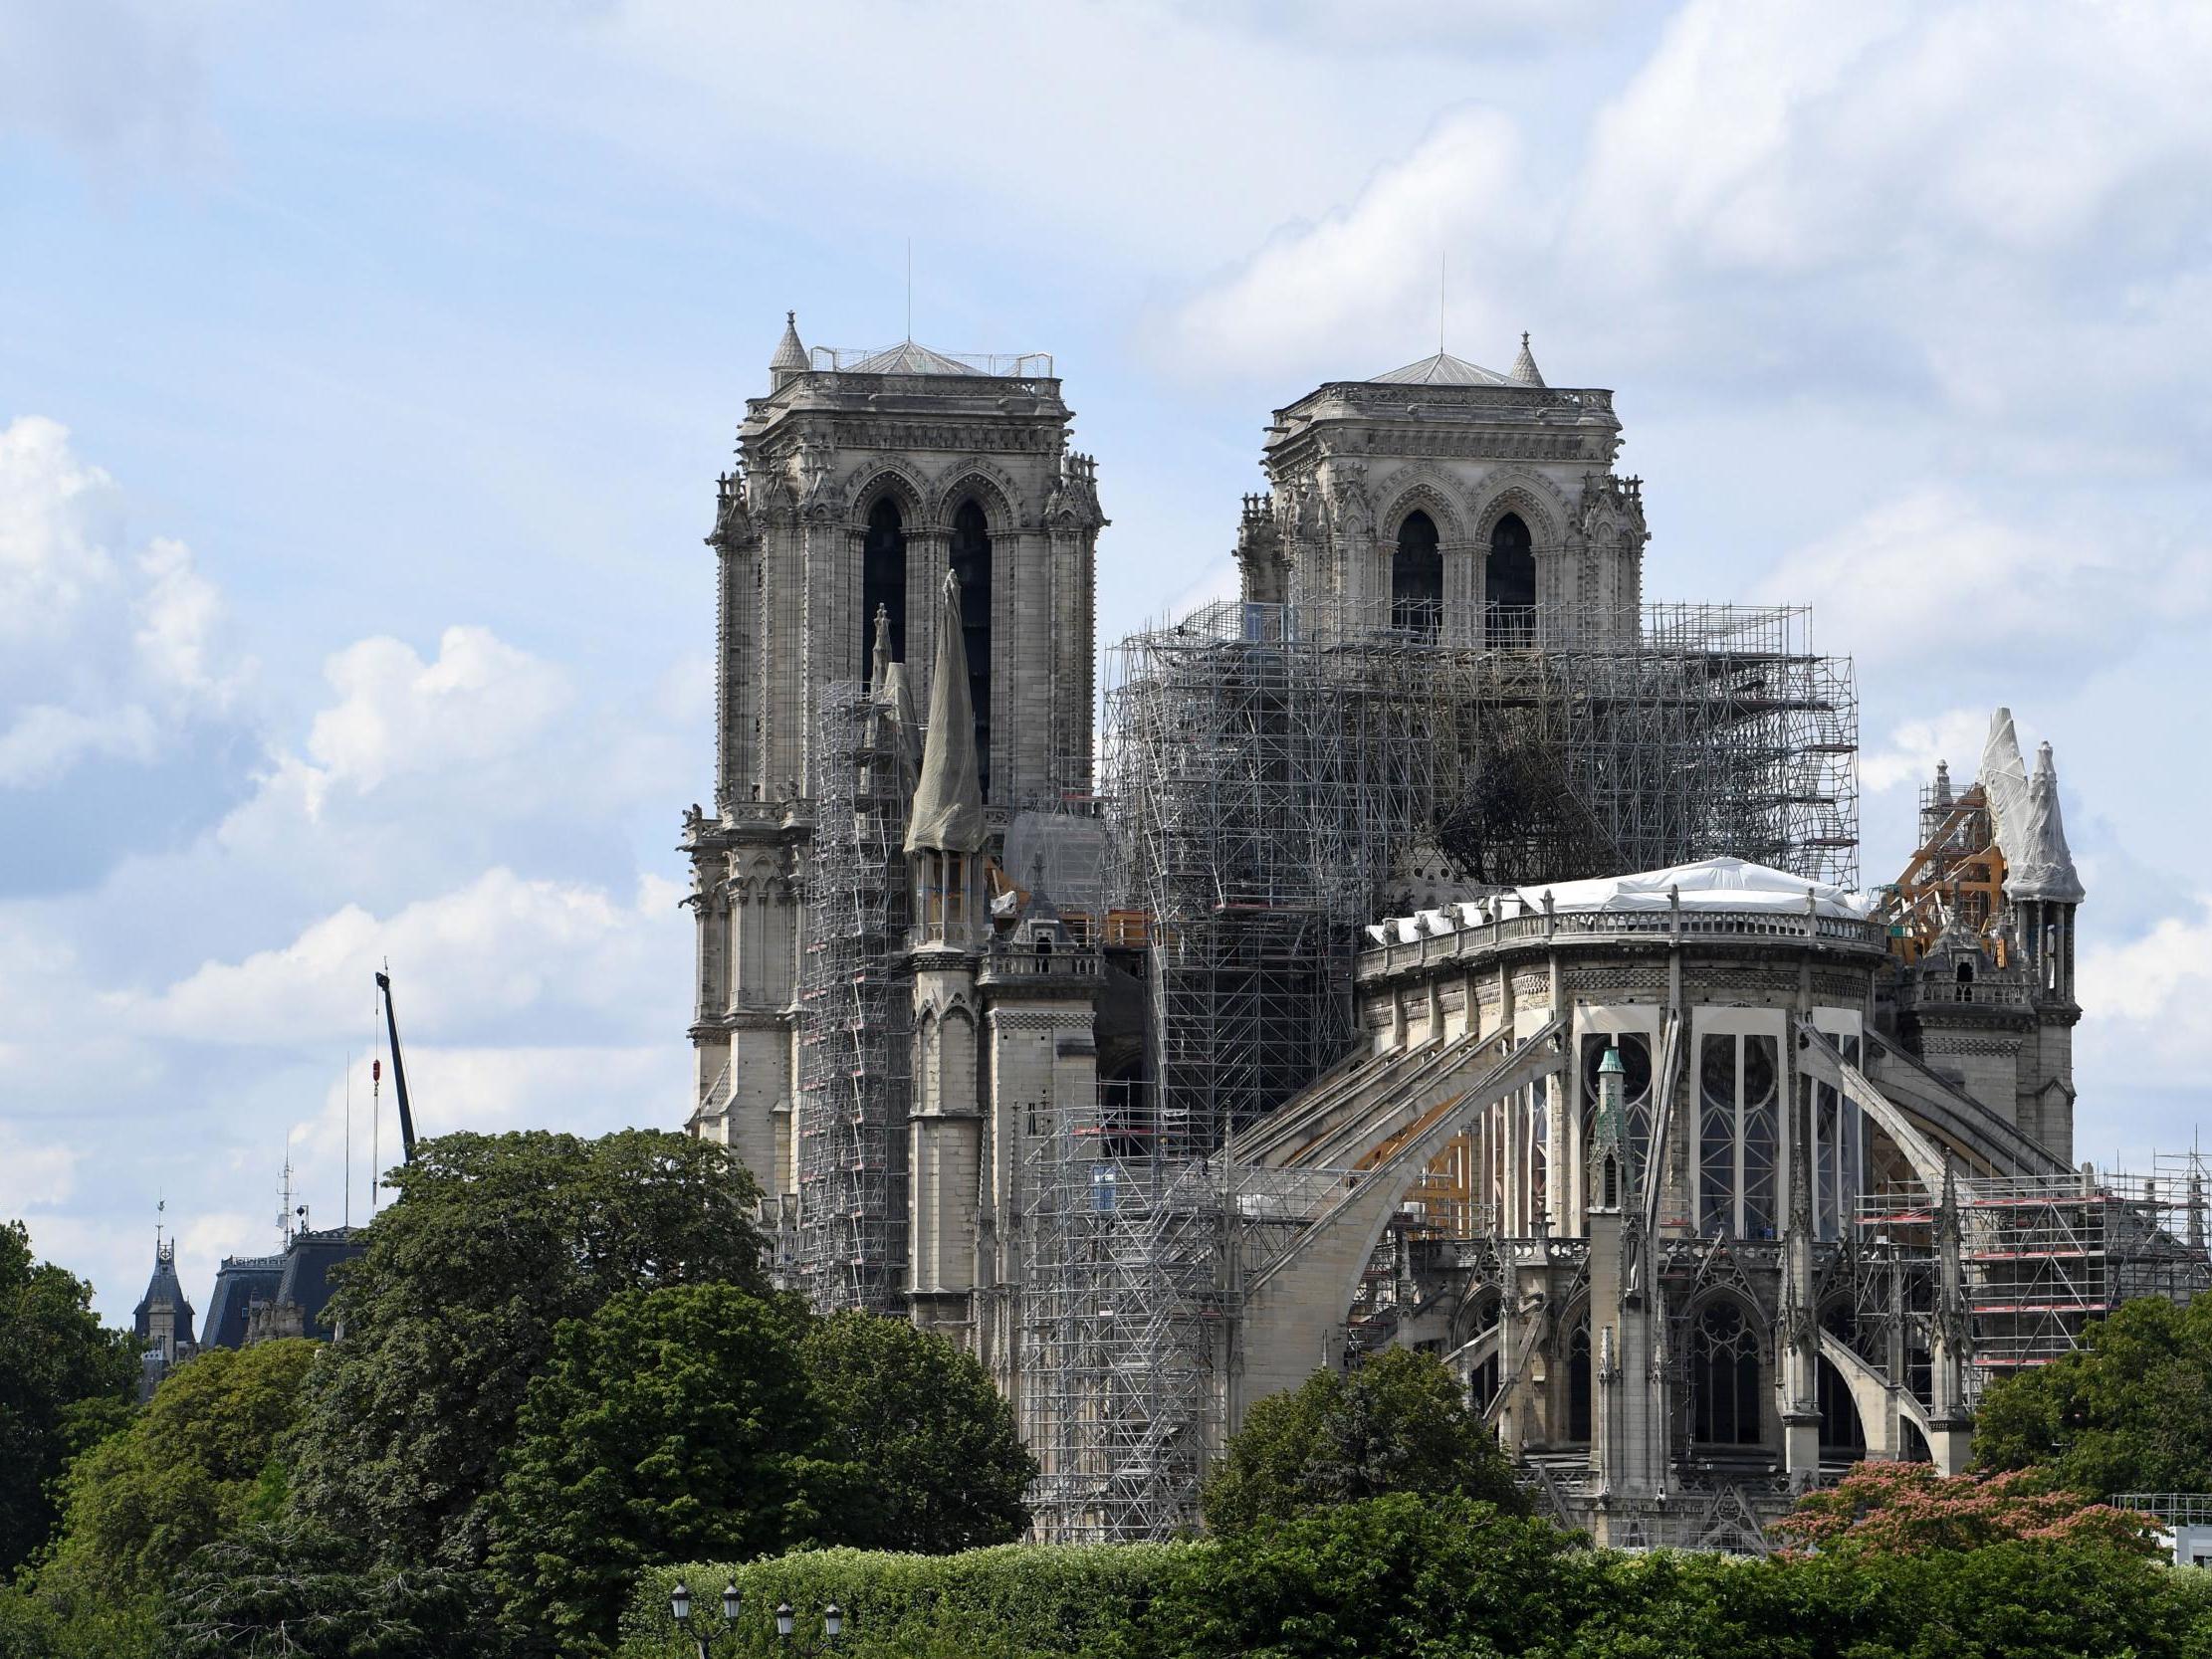 Campaigners want the rebuilding effort of Notre Dame to be more considerate of the environment